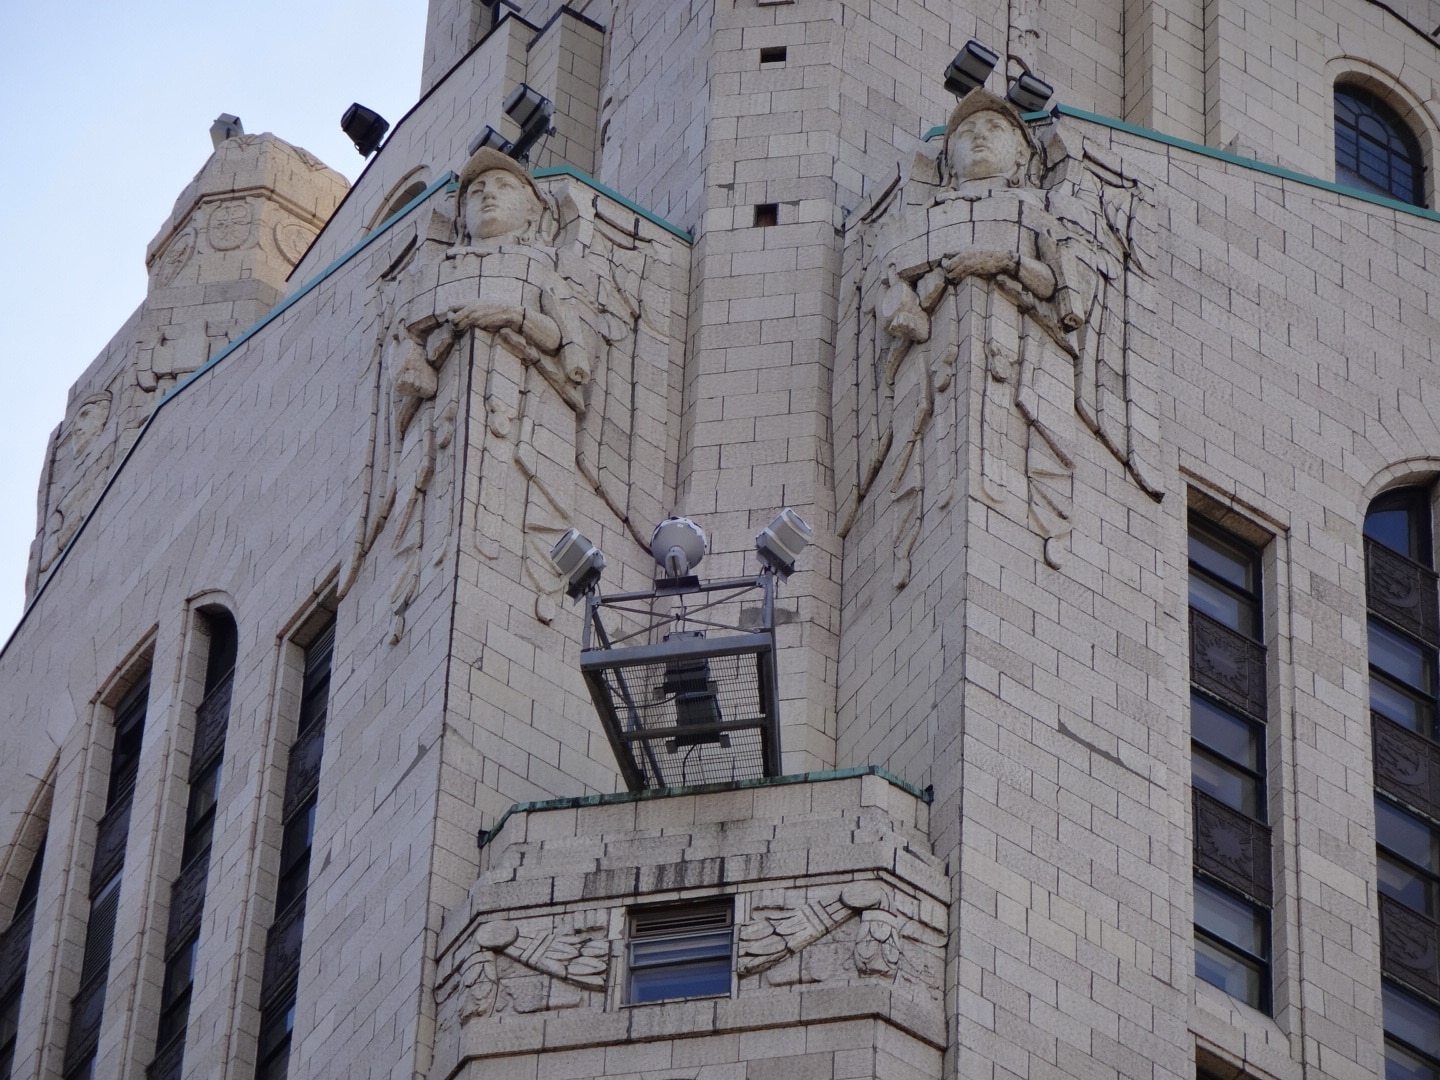 The LeVeque Tower is a steel frame building covered in glazed architectural terra-cotta tiles with an oak-bark texture.

Originally, the building's exterior featured a large number of sculptures. However, much of it had to be removed because the terra-cotta began to crumble and fall to the street. Lost sculptures include four 18 feet eagles at the corners of the building at the 36th floor and four 20 feet statues of colossus and youth on the sides of the building at the setback of the 40th floor 

The spaces left by the departed sculpture serve as the bases for lights used to illuminate the tower. The Tower is often illuminated in white, but the colors change for certain holidays. Green for St,. Patrick's Day. Red, White and Blue for the 4th of July. Red and Green for the Christmas season.

#architecture